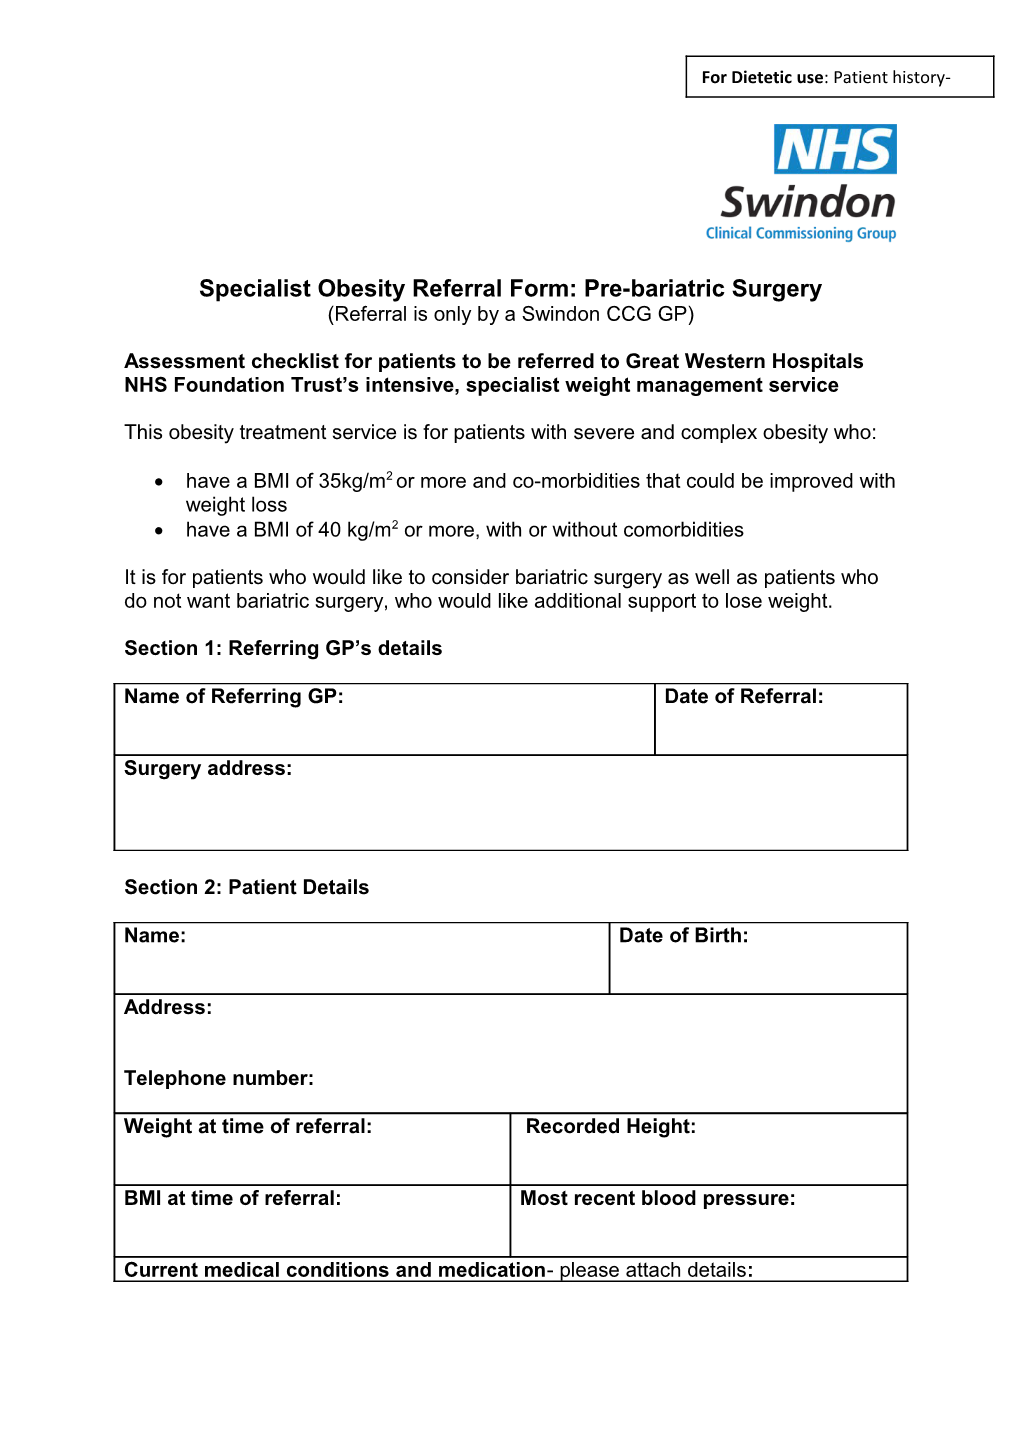 Specialist Obesity Referral Form: Pre-Bariatric Surgery